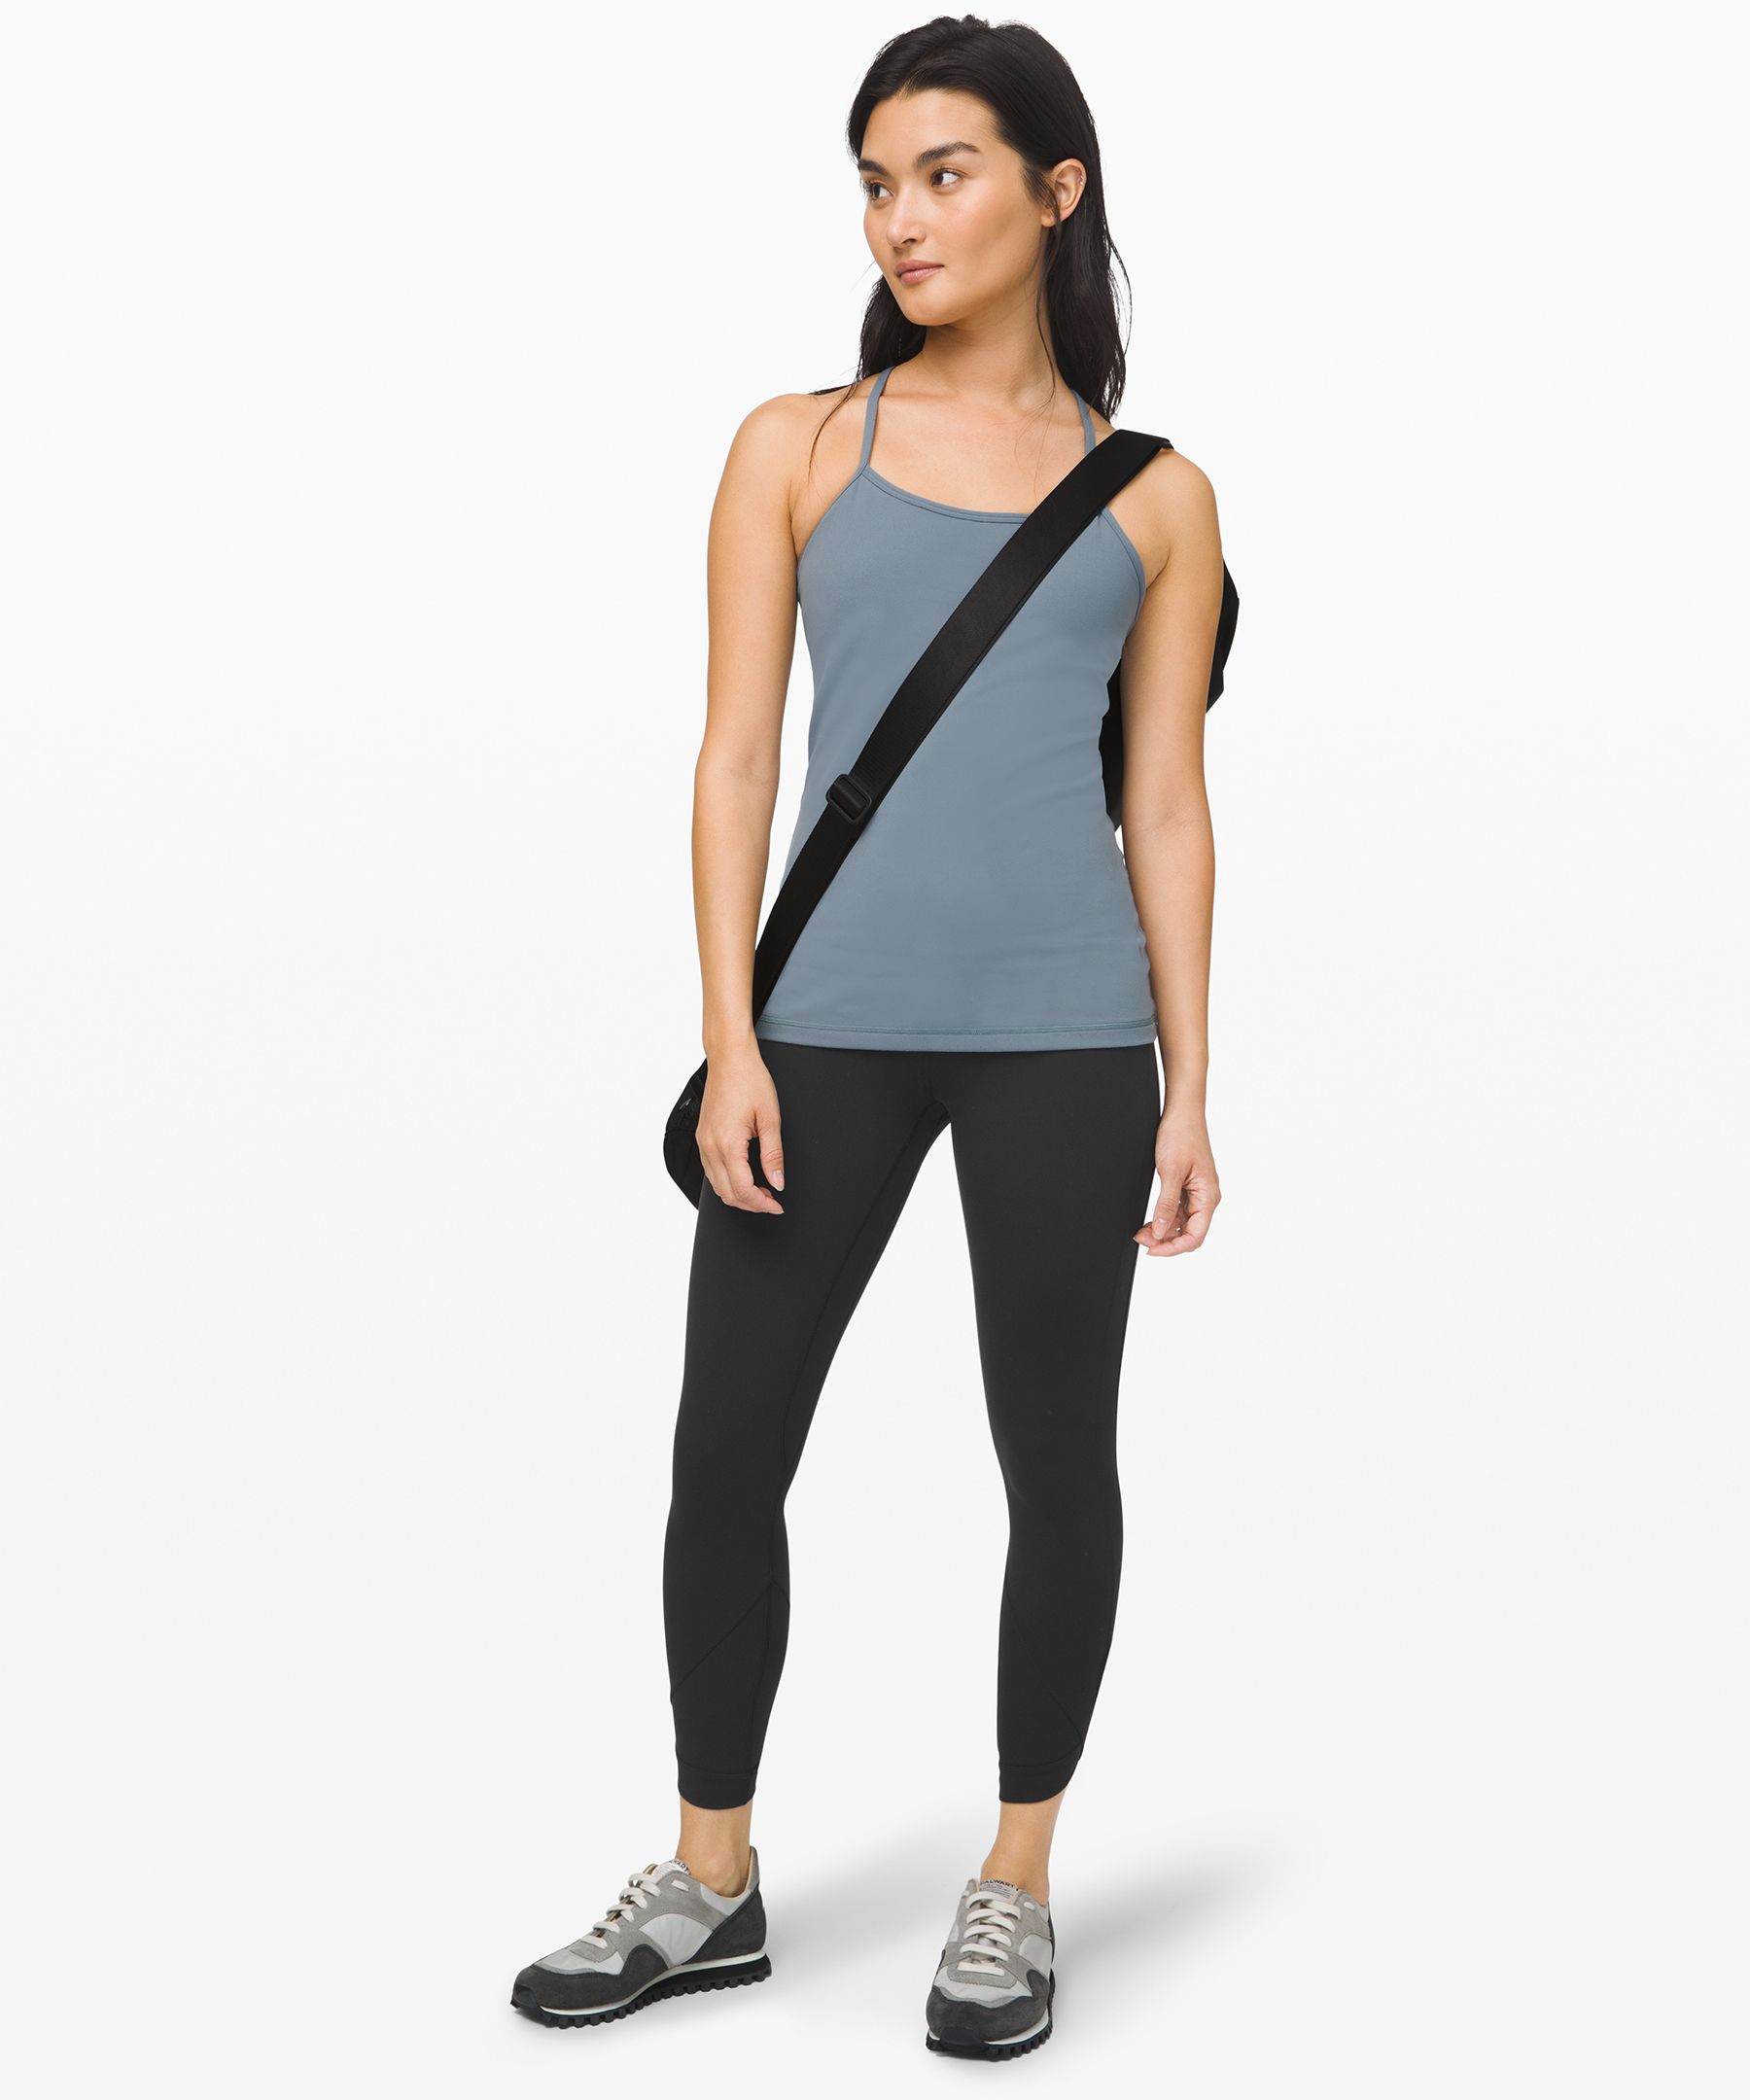 Lululemon Asia Fit Review  International Society of Precision Agriculture